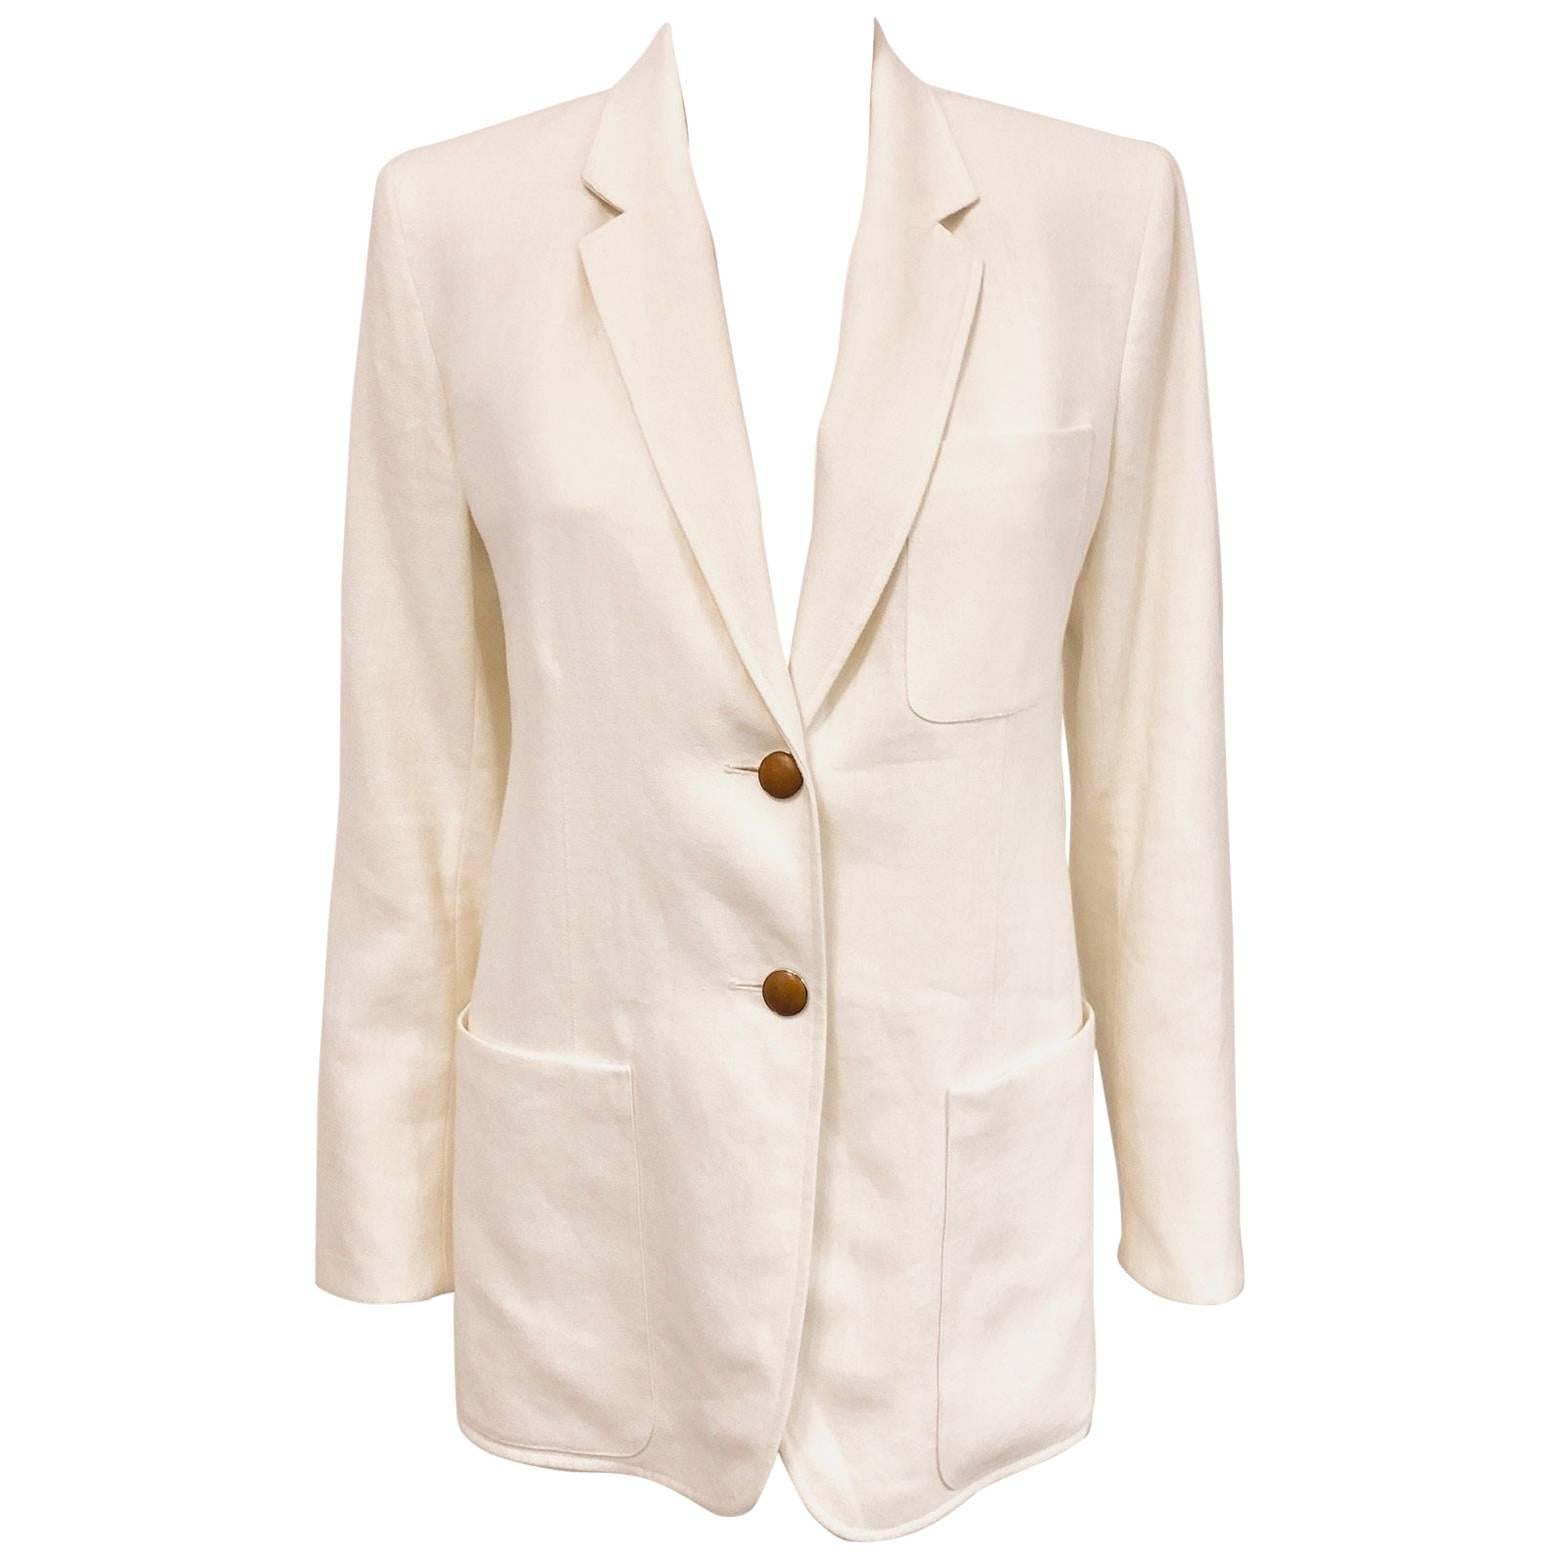 Hermes Ivory Linen Single Breasted Two Button Jacket 42 EU For Sale